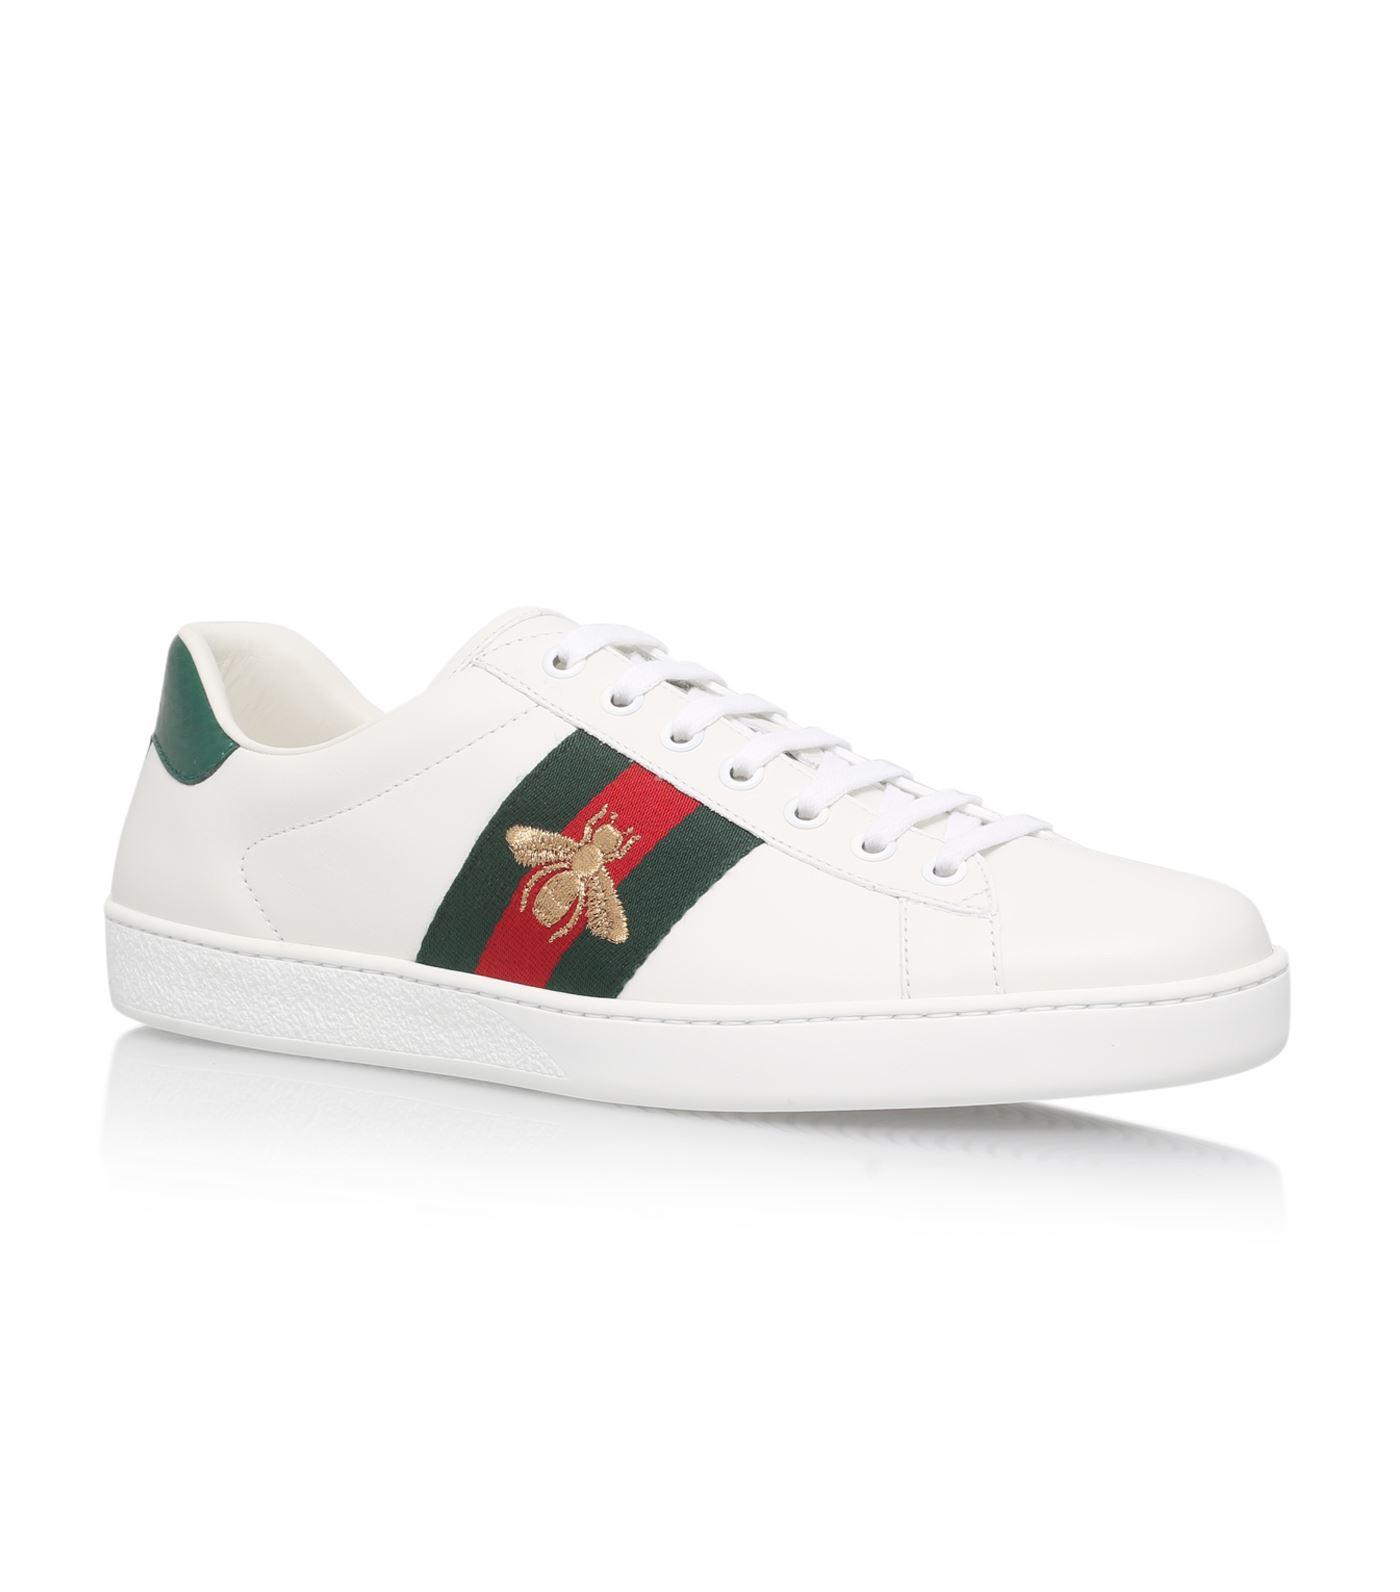 Gucci Leather Ace Bee Sneakers in White for Men - Lyst